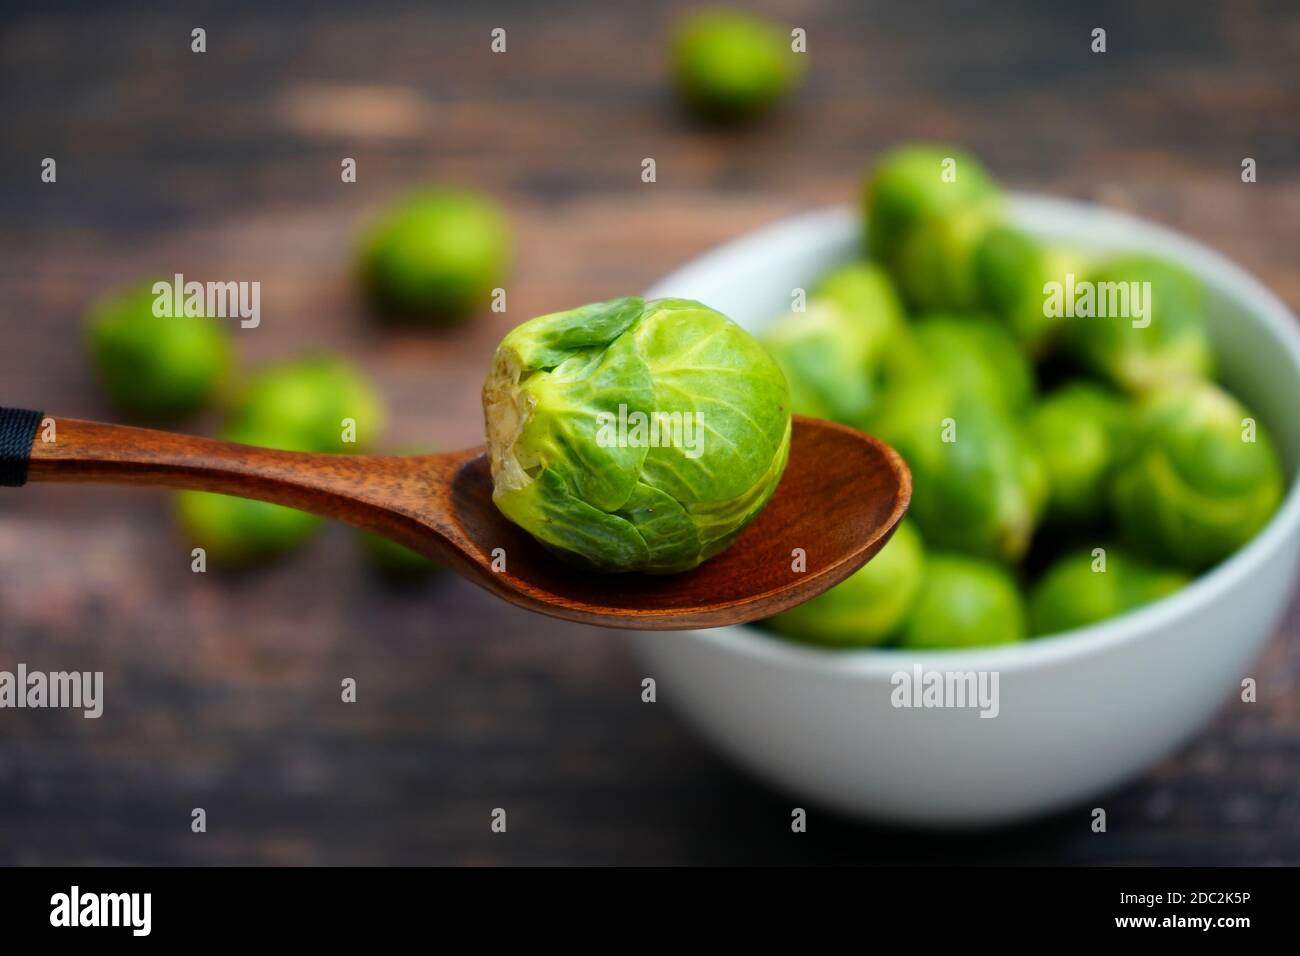 A wooden spoon holding a fresh Brussels sprout (German word: Rosenkohl). White bowl with Brussels sprouts in the blurred background. Stock Photo